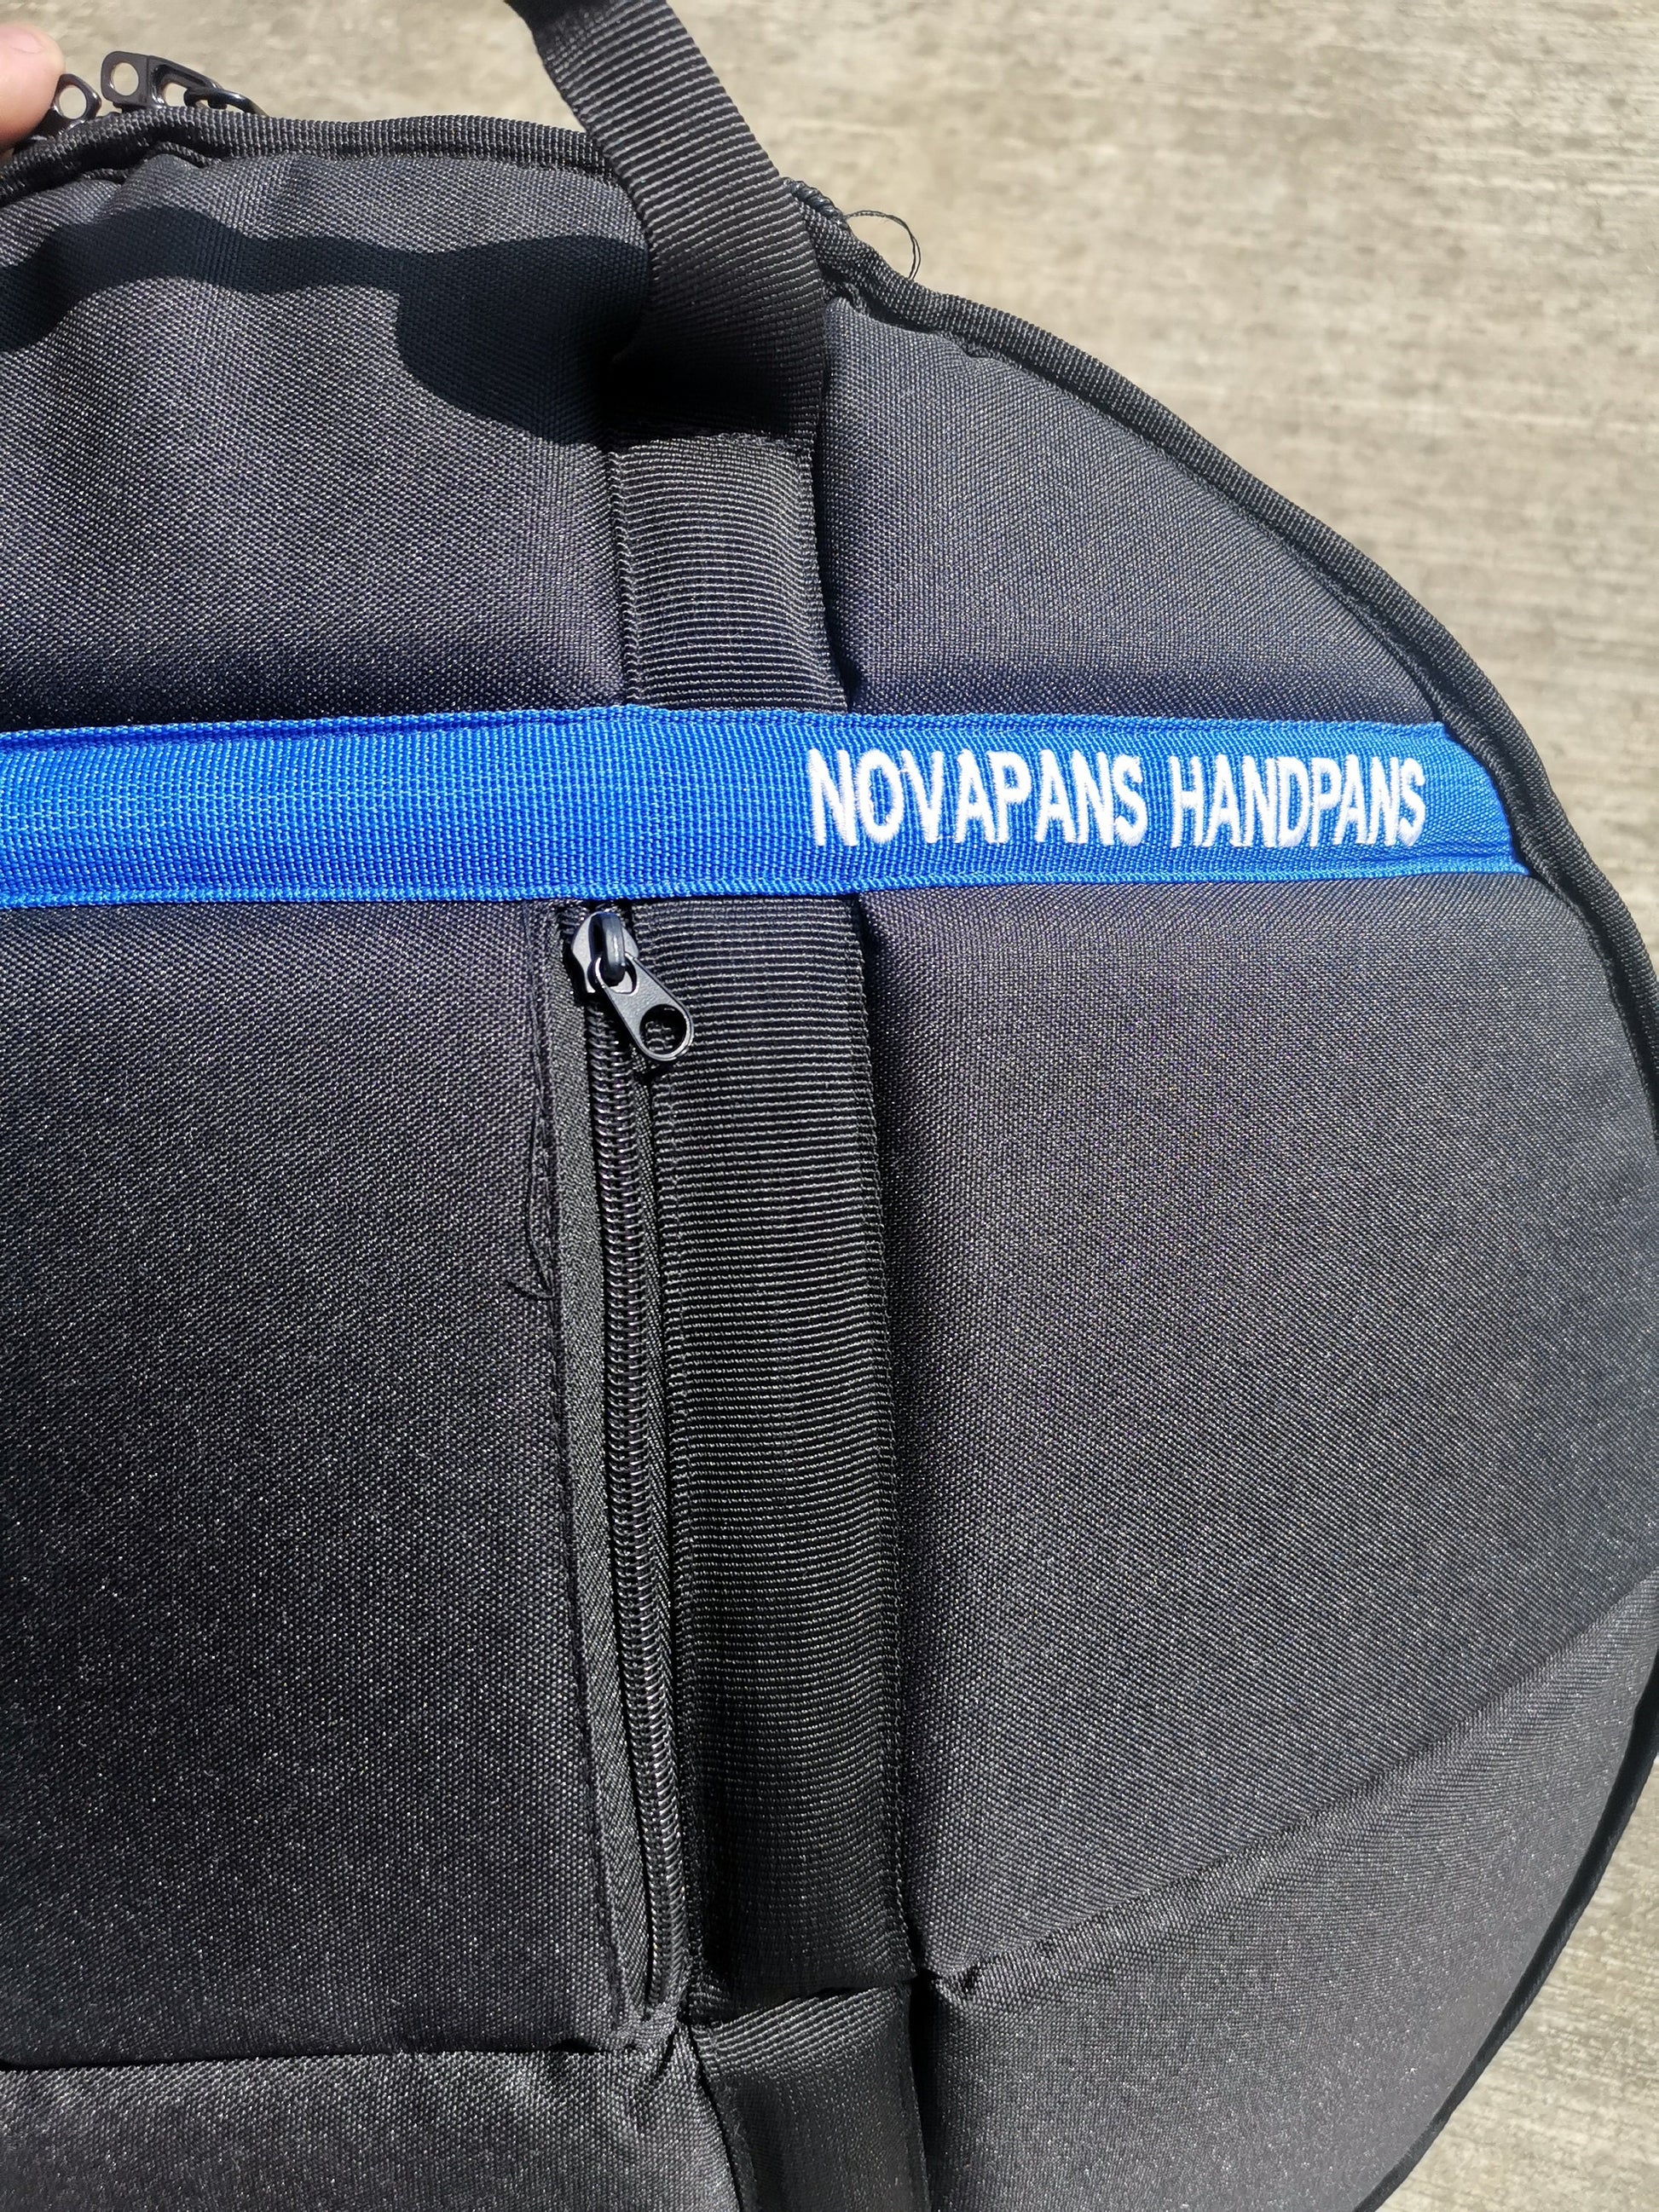 Handpan Softcases & Accessories by NovaPans Handpans - NovaPans Handpans